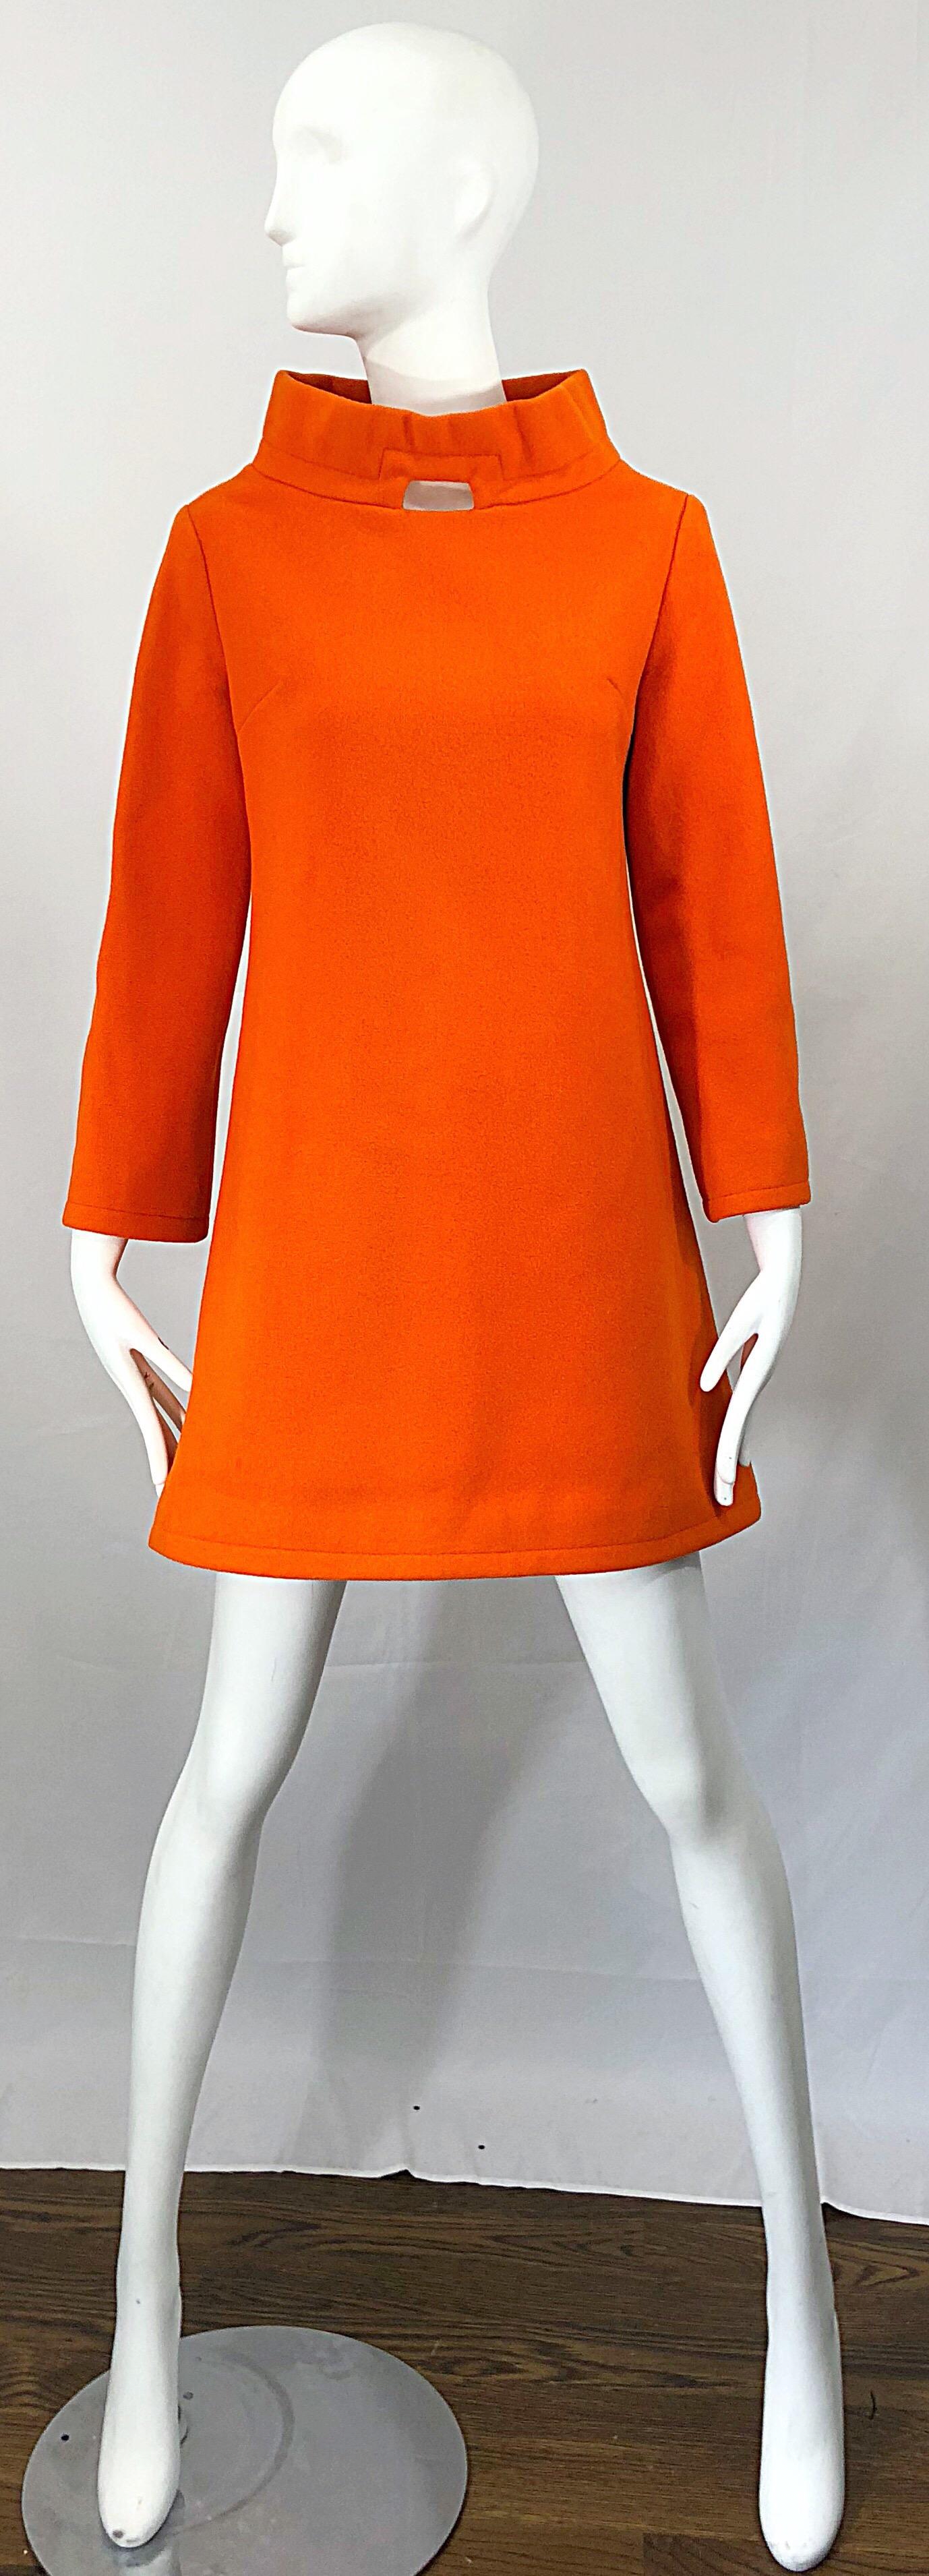 Insanely chic 1960s LIONEL & ELVIA orange wool A-Line mini dress or tunic! Features a stylish funnel neck with a cut-out at center neck. Full metal zipper up the back with hook-and-eye closures at back neck. Fully lined. Tailored bodice with a